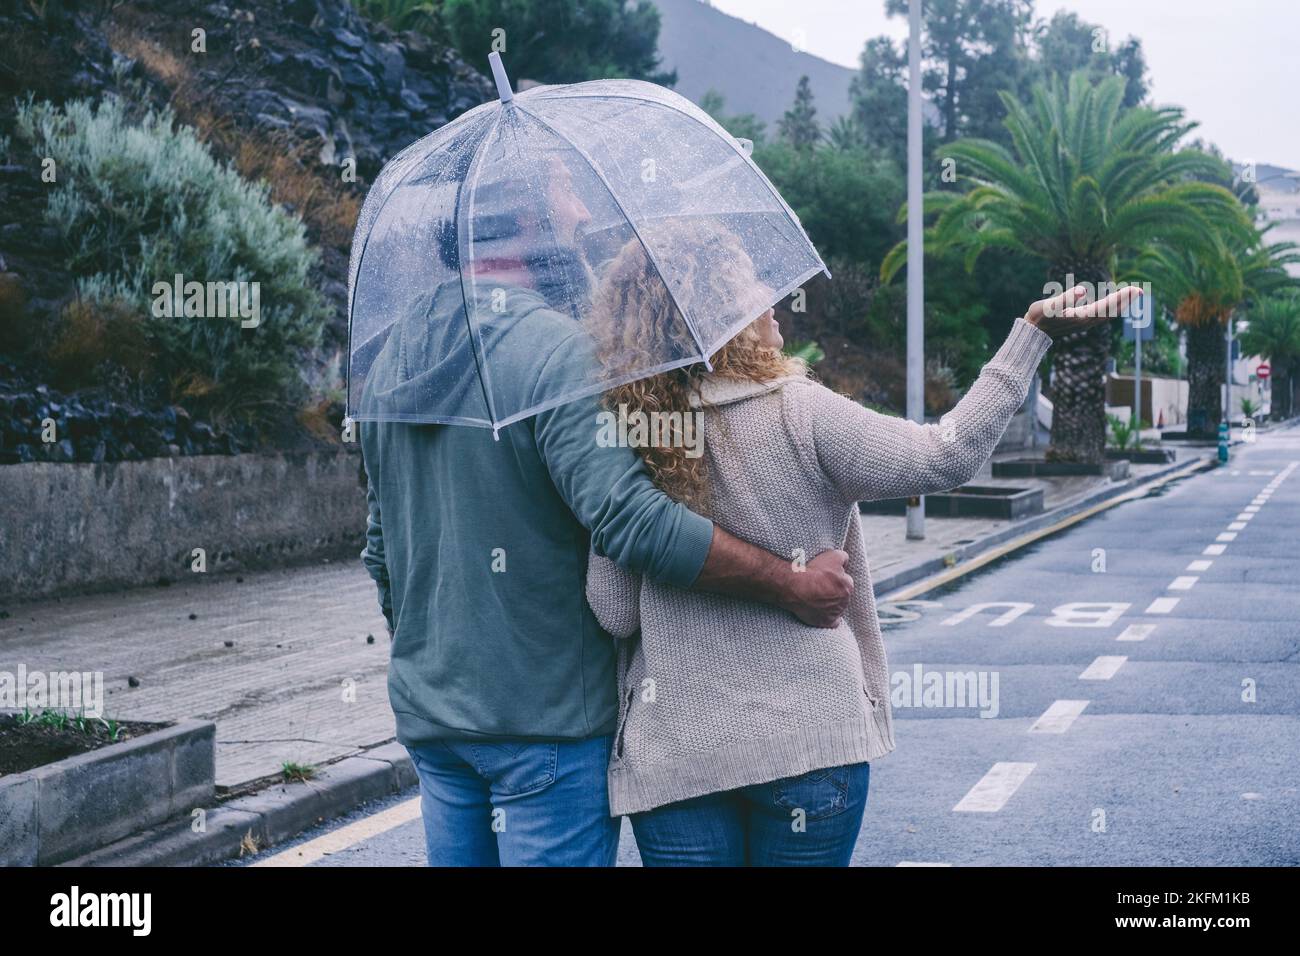 Back view of happy couple in love enjoying rain day with umbrella. Urban street in background. Outdoor leisure activity and concept of relationship to Stock Photo